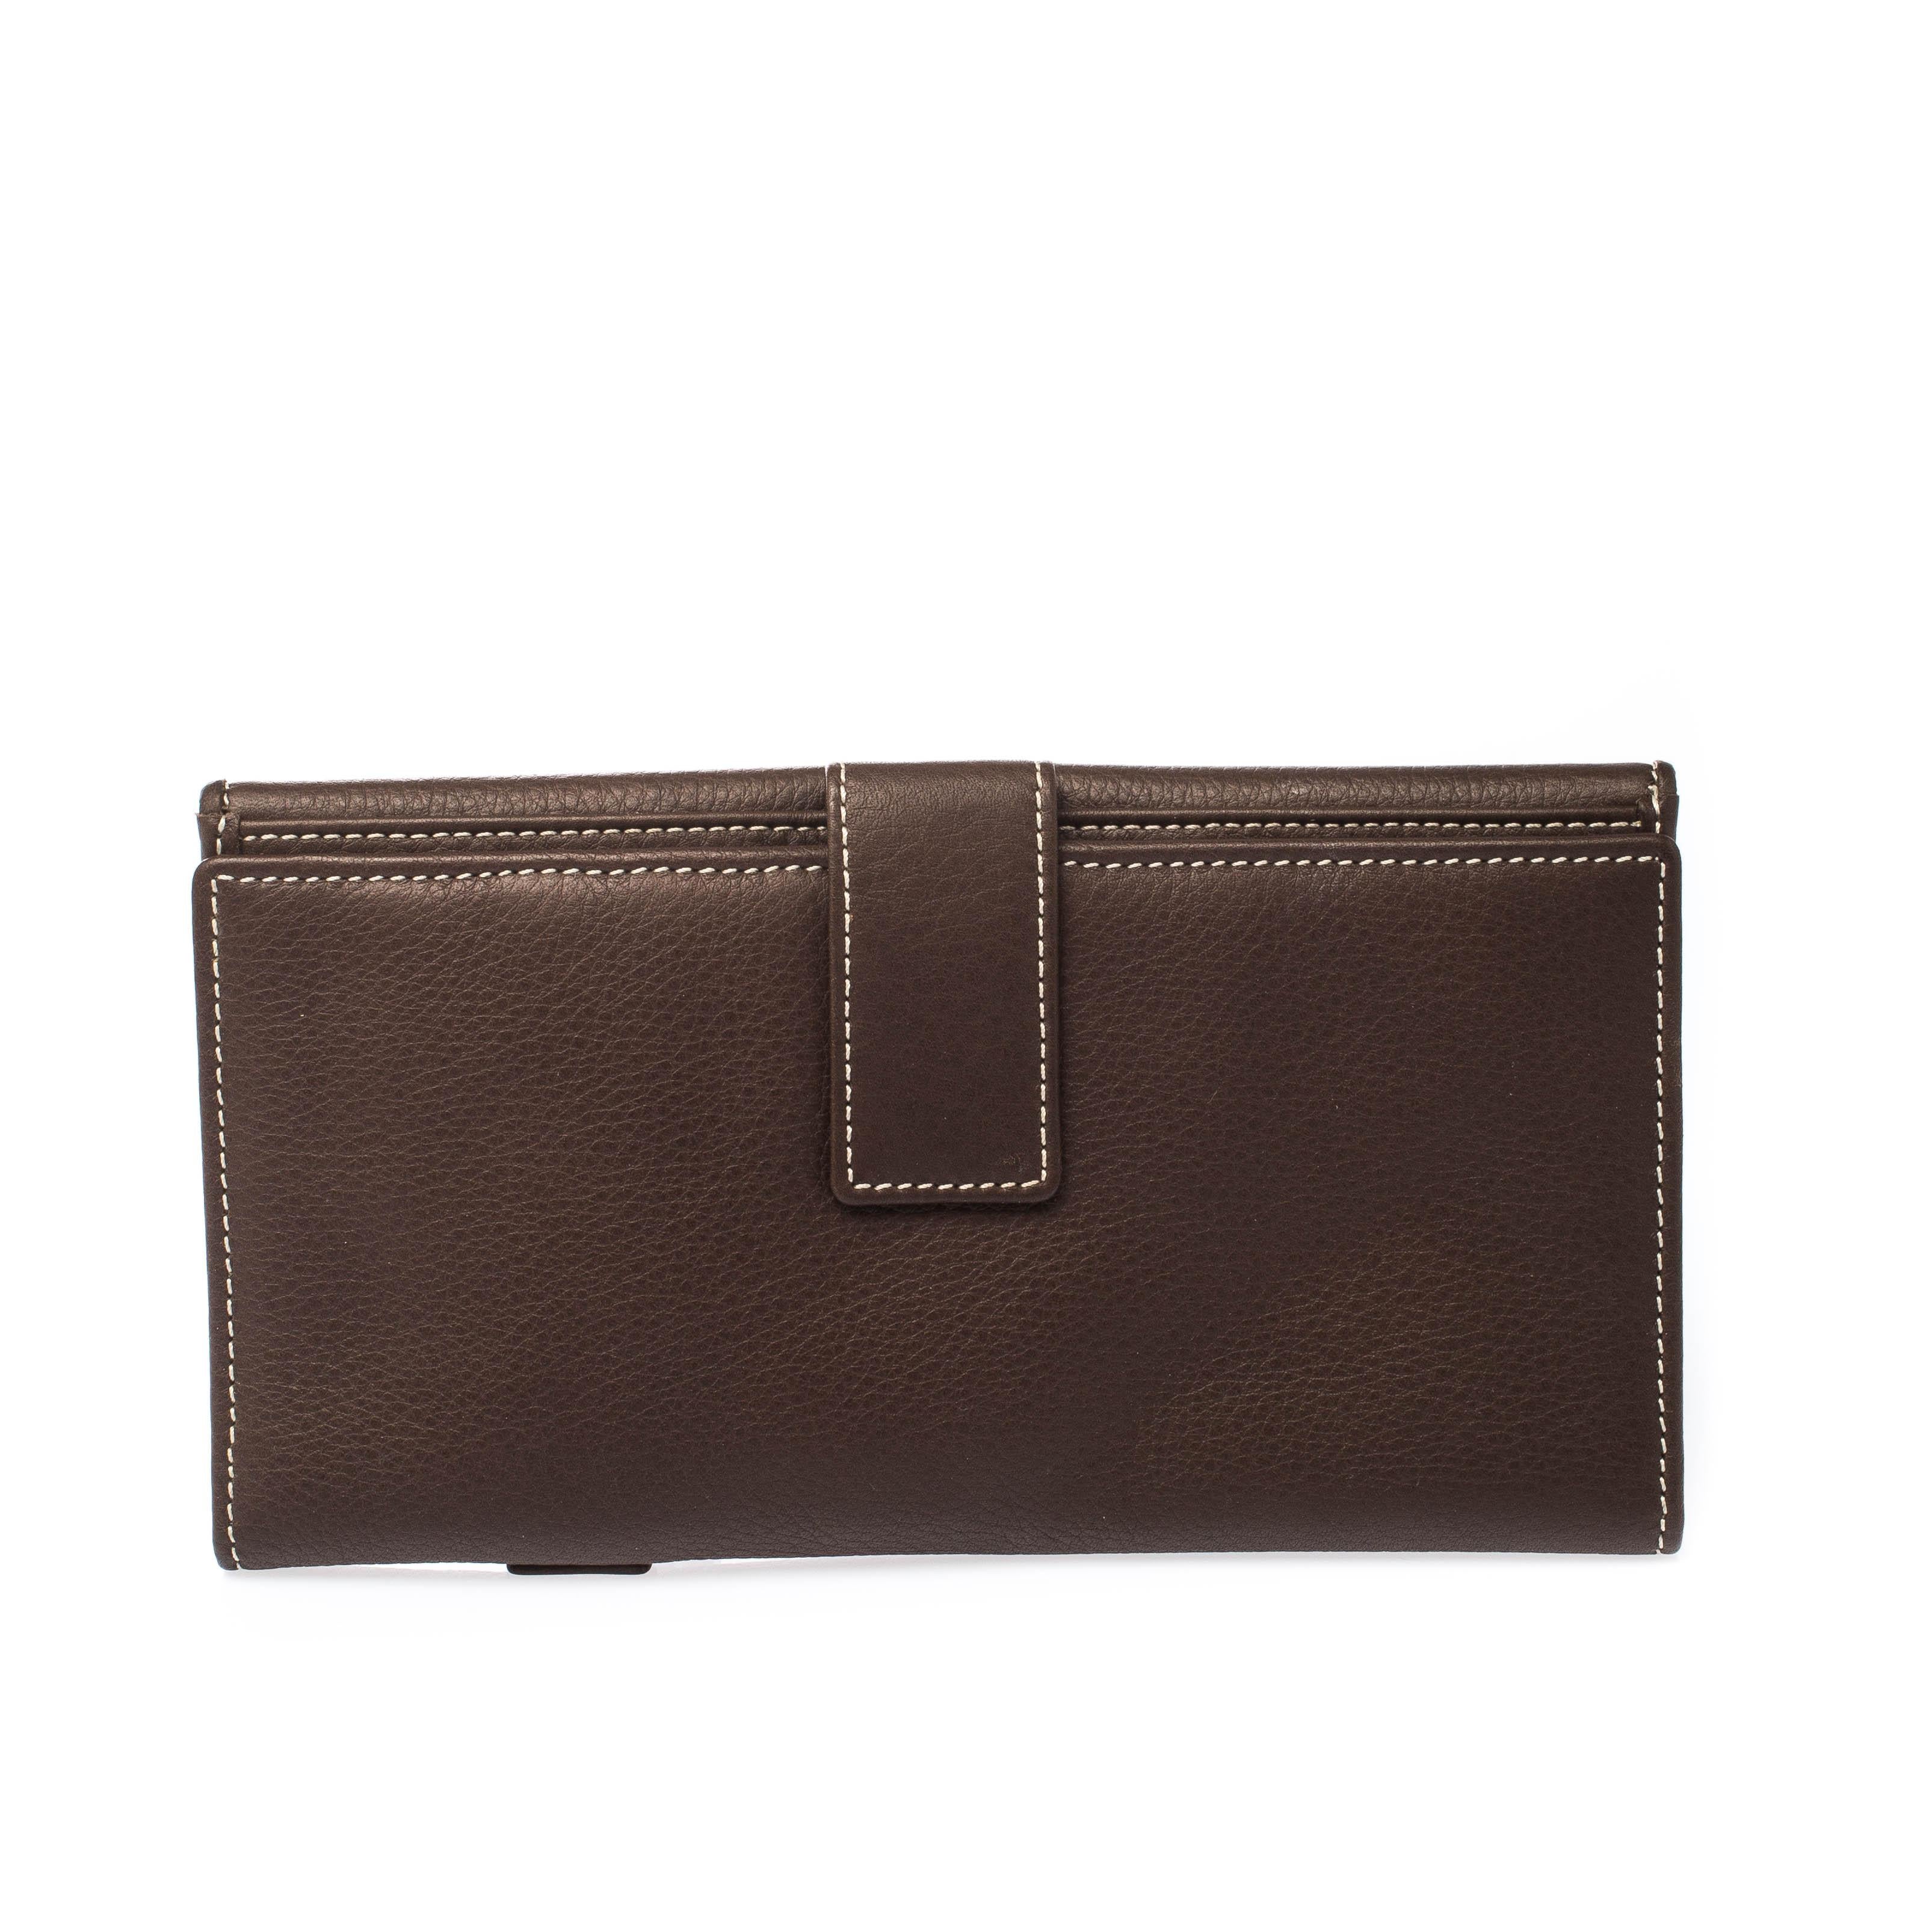 Take this spacious and functional wallet by Dior everywhere. Crafted from leather, this front flap wallet is accented with a gold-tone D. The easy to organize interior features open compartments and card slots.

Includes: The Luxury Closet